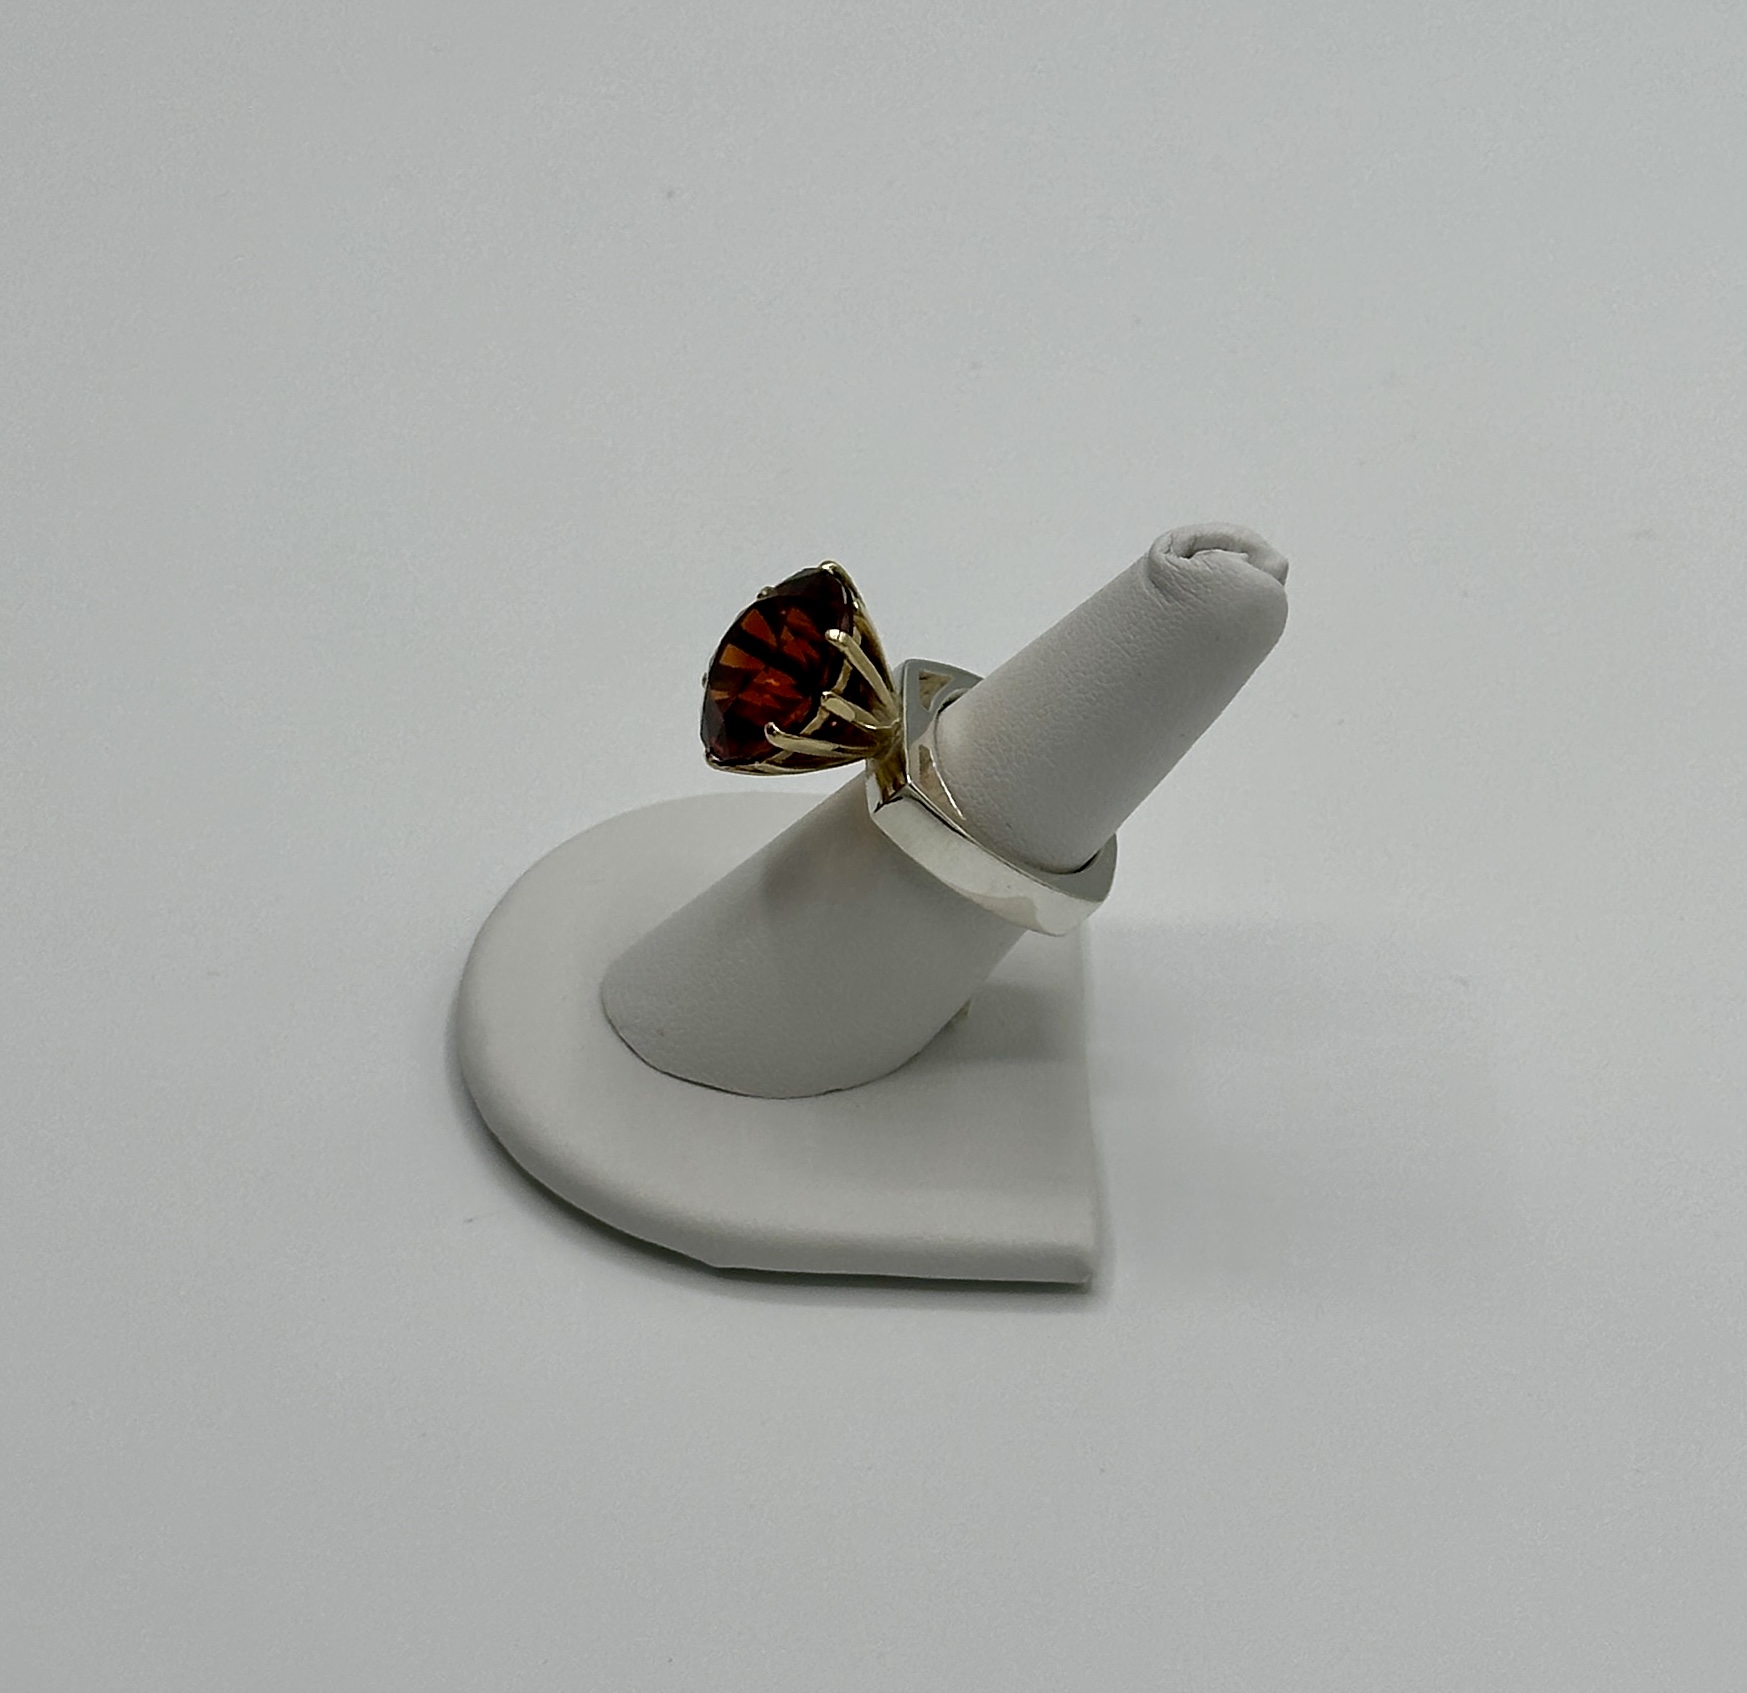 925 Silver Sterling Ring with Giant, Garnet, Stone, Ballast, Weighted, and Hand Cast using Lost Wax Method